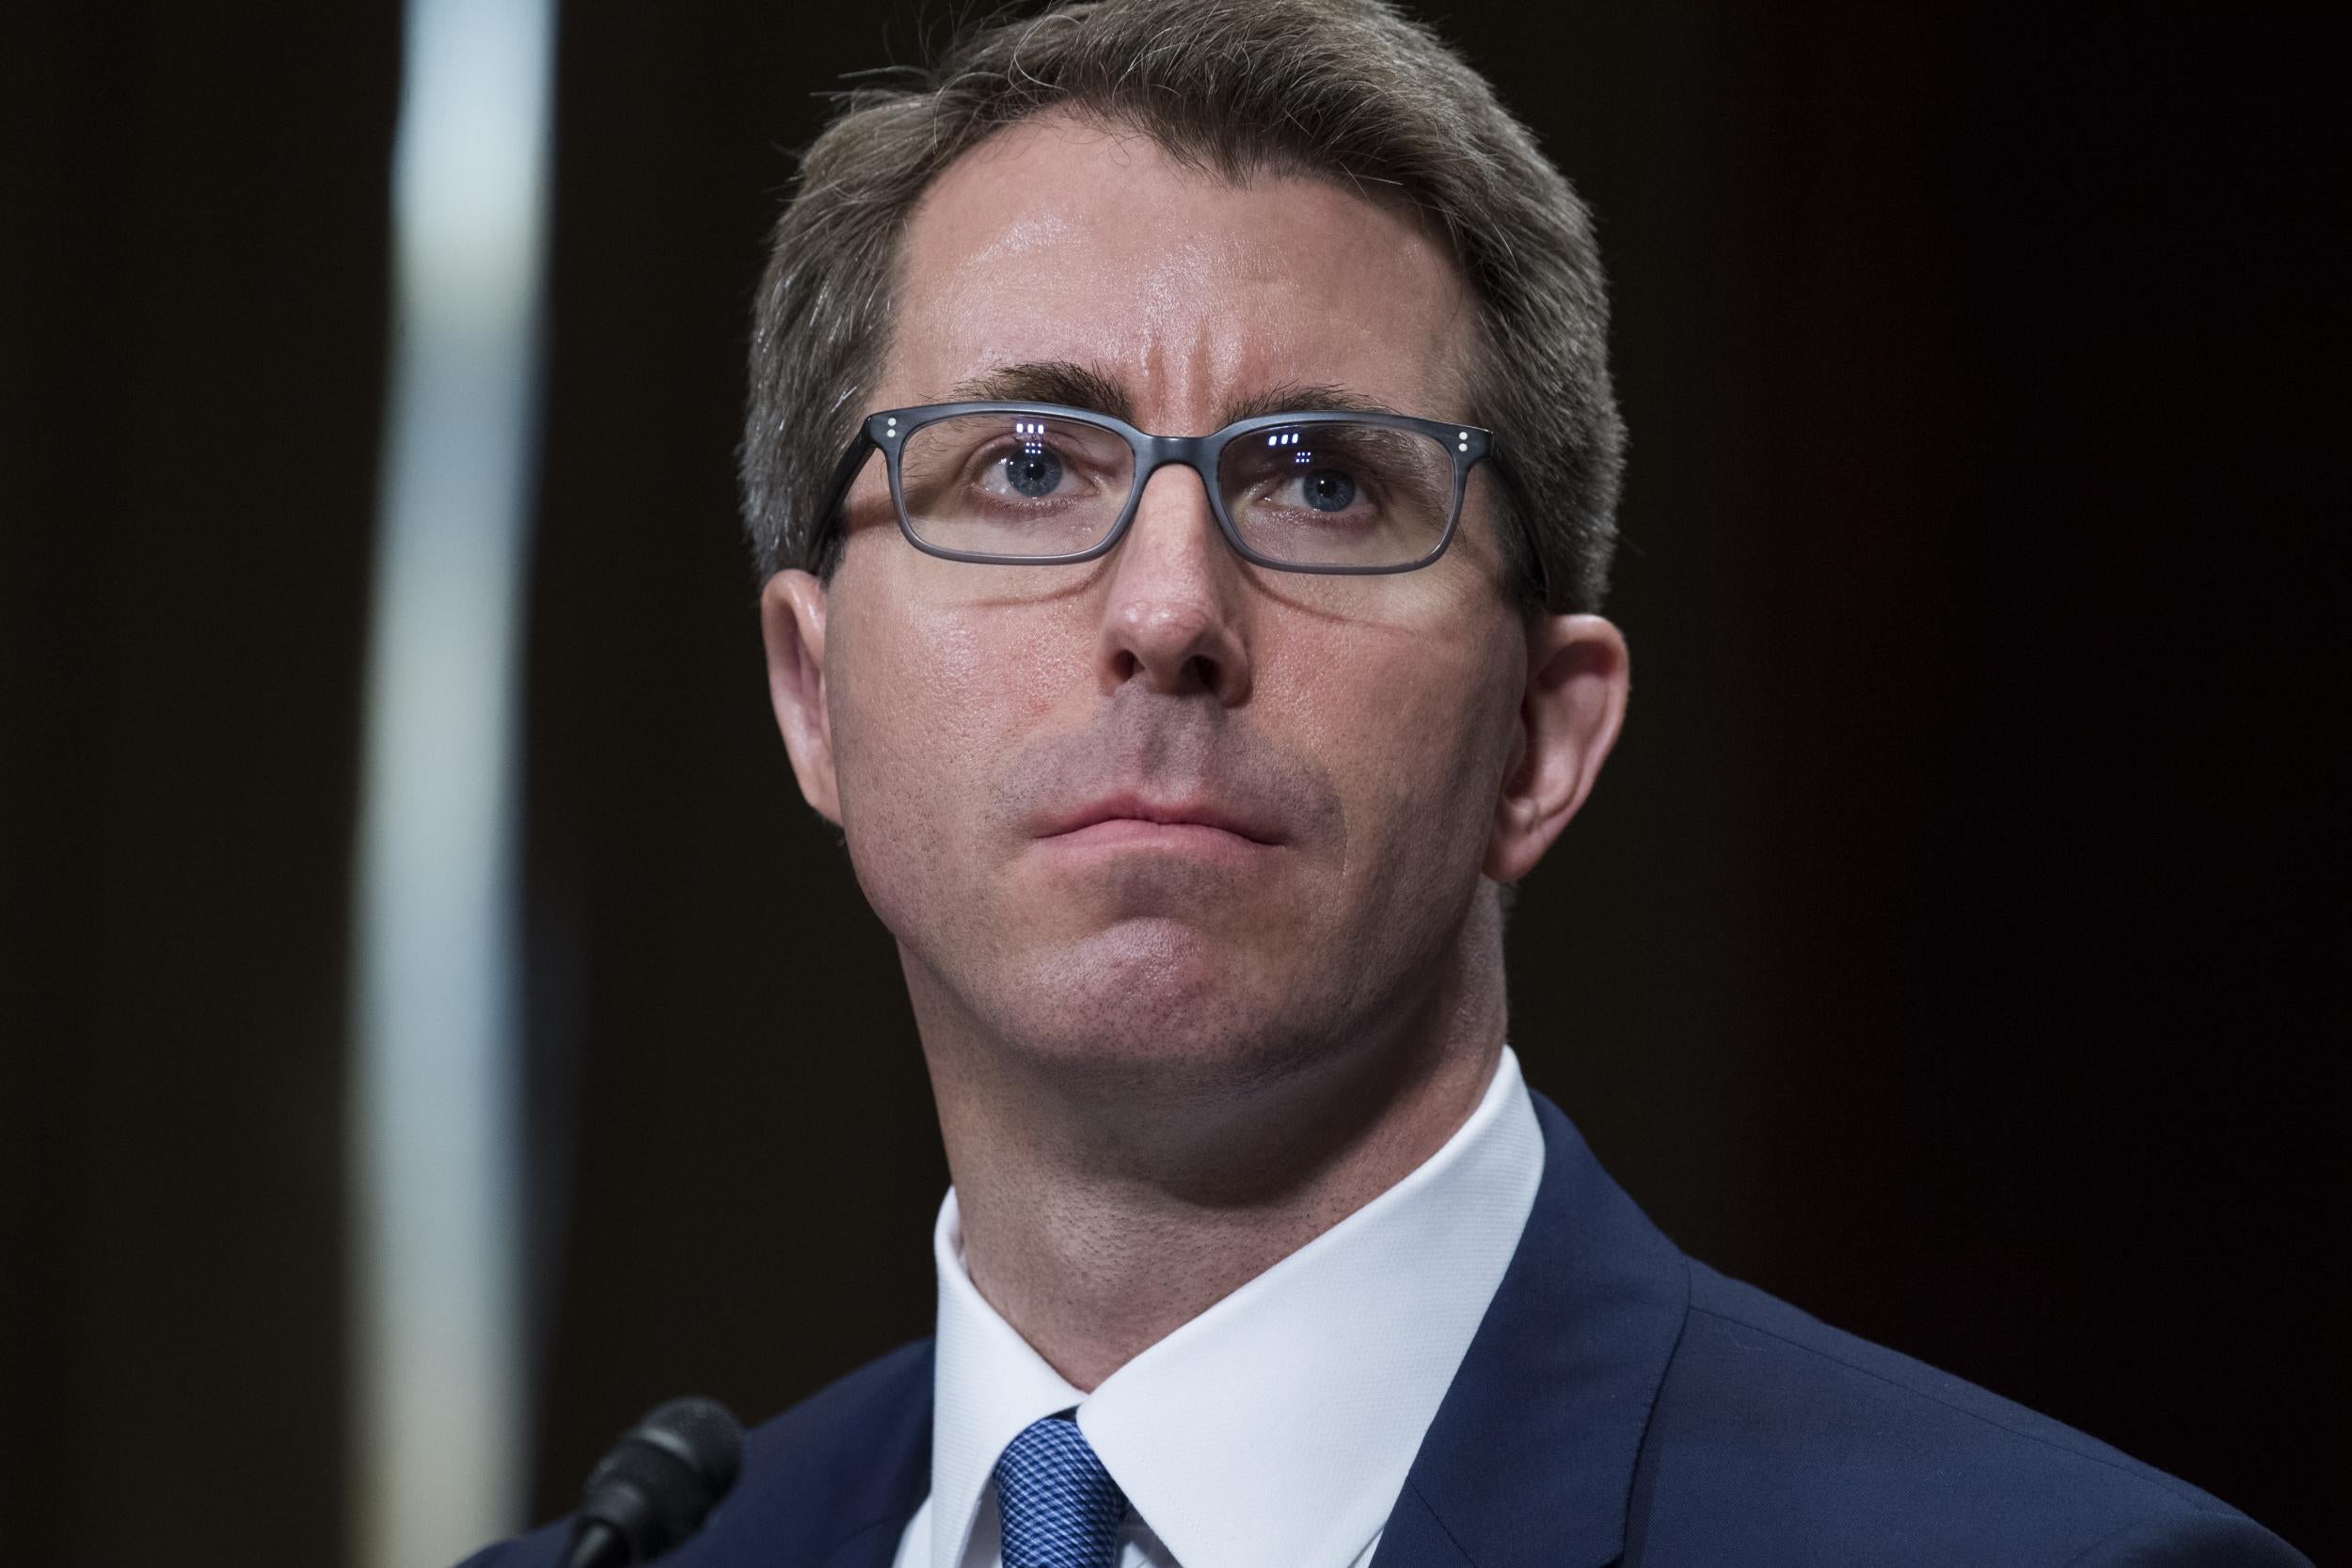 Ryan Wesley Bounds, nominee for United States Circuit Judge for the Ninth Circuit, testifies during his Senate Judiciary Committee confirmation hearing